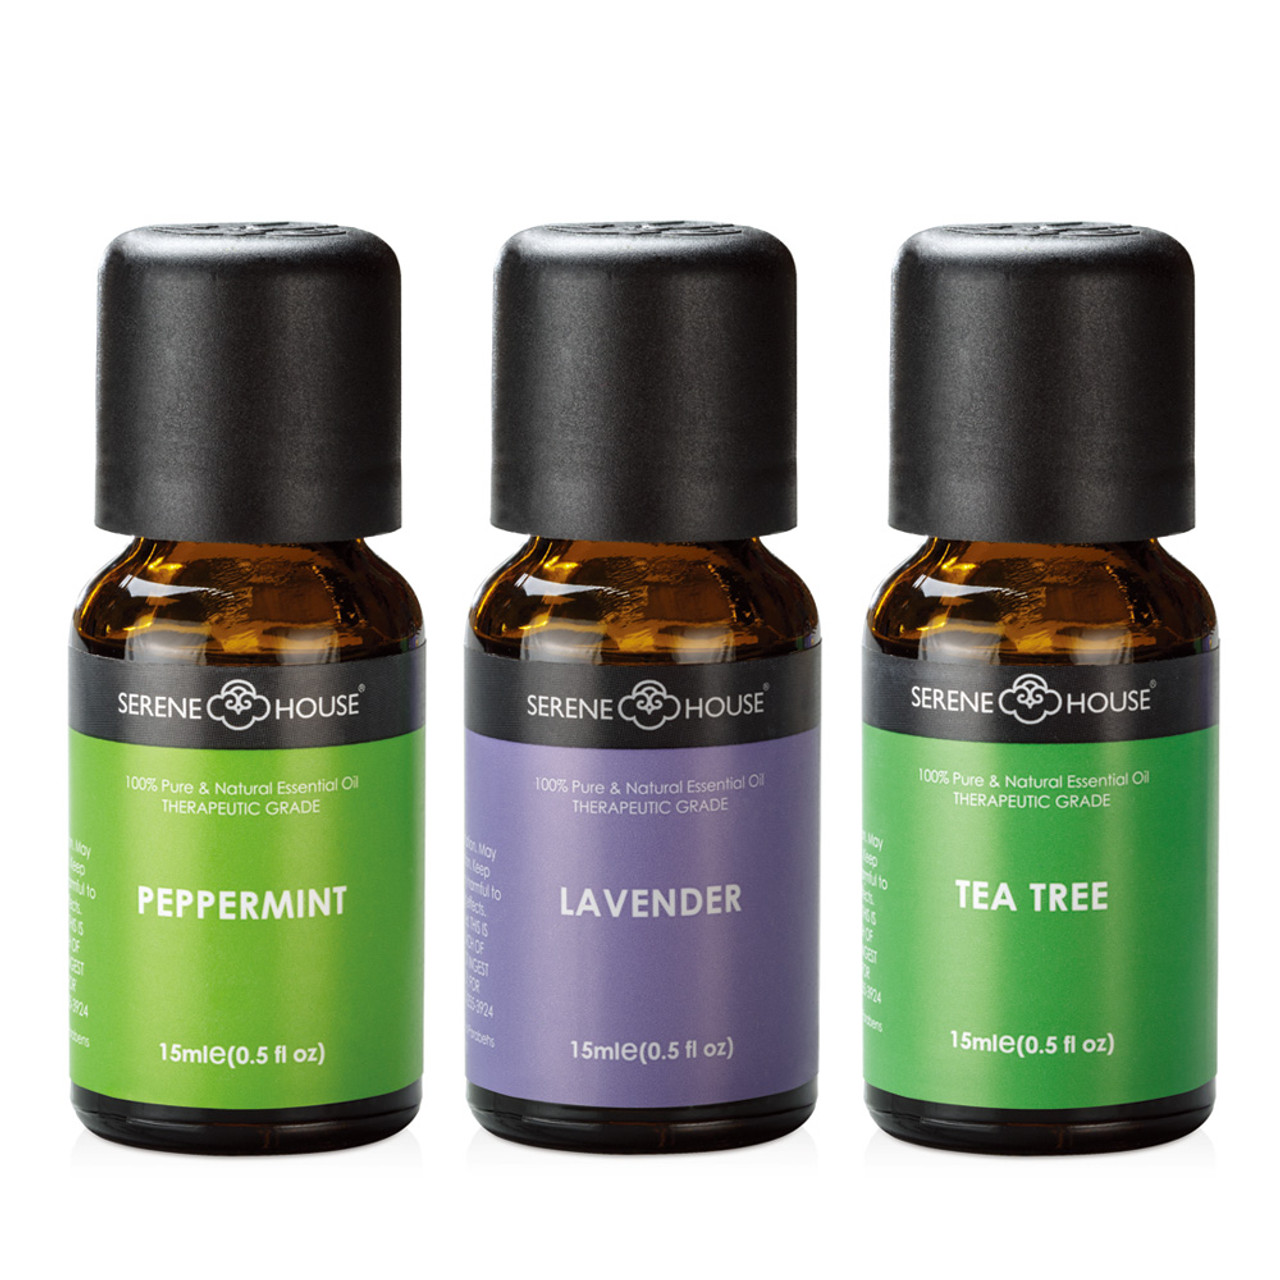 Serene House 100% Natural Essential Oil Apothecary Set